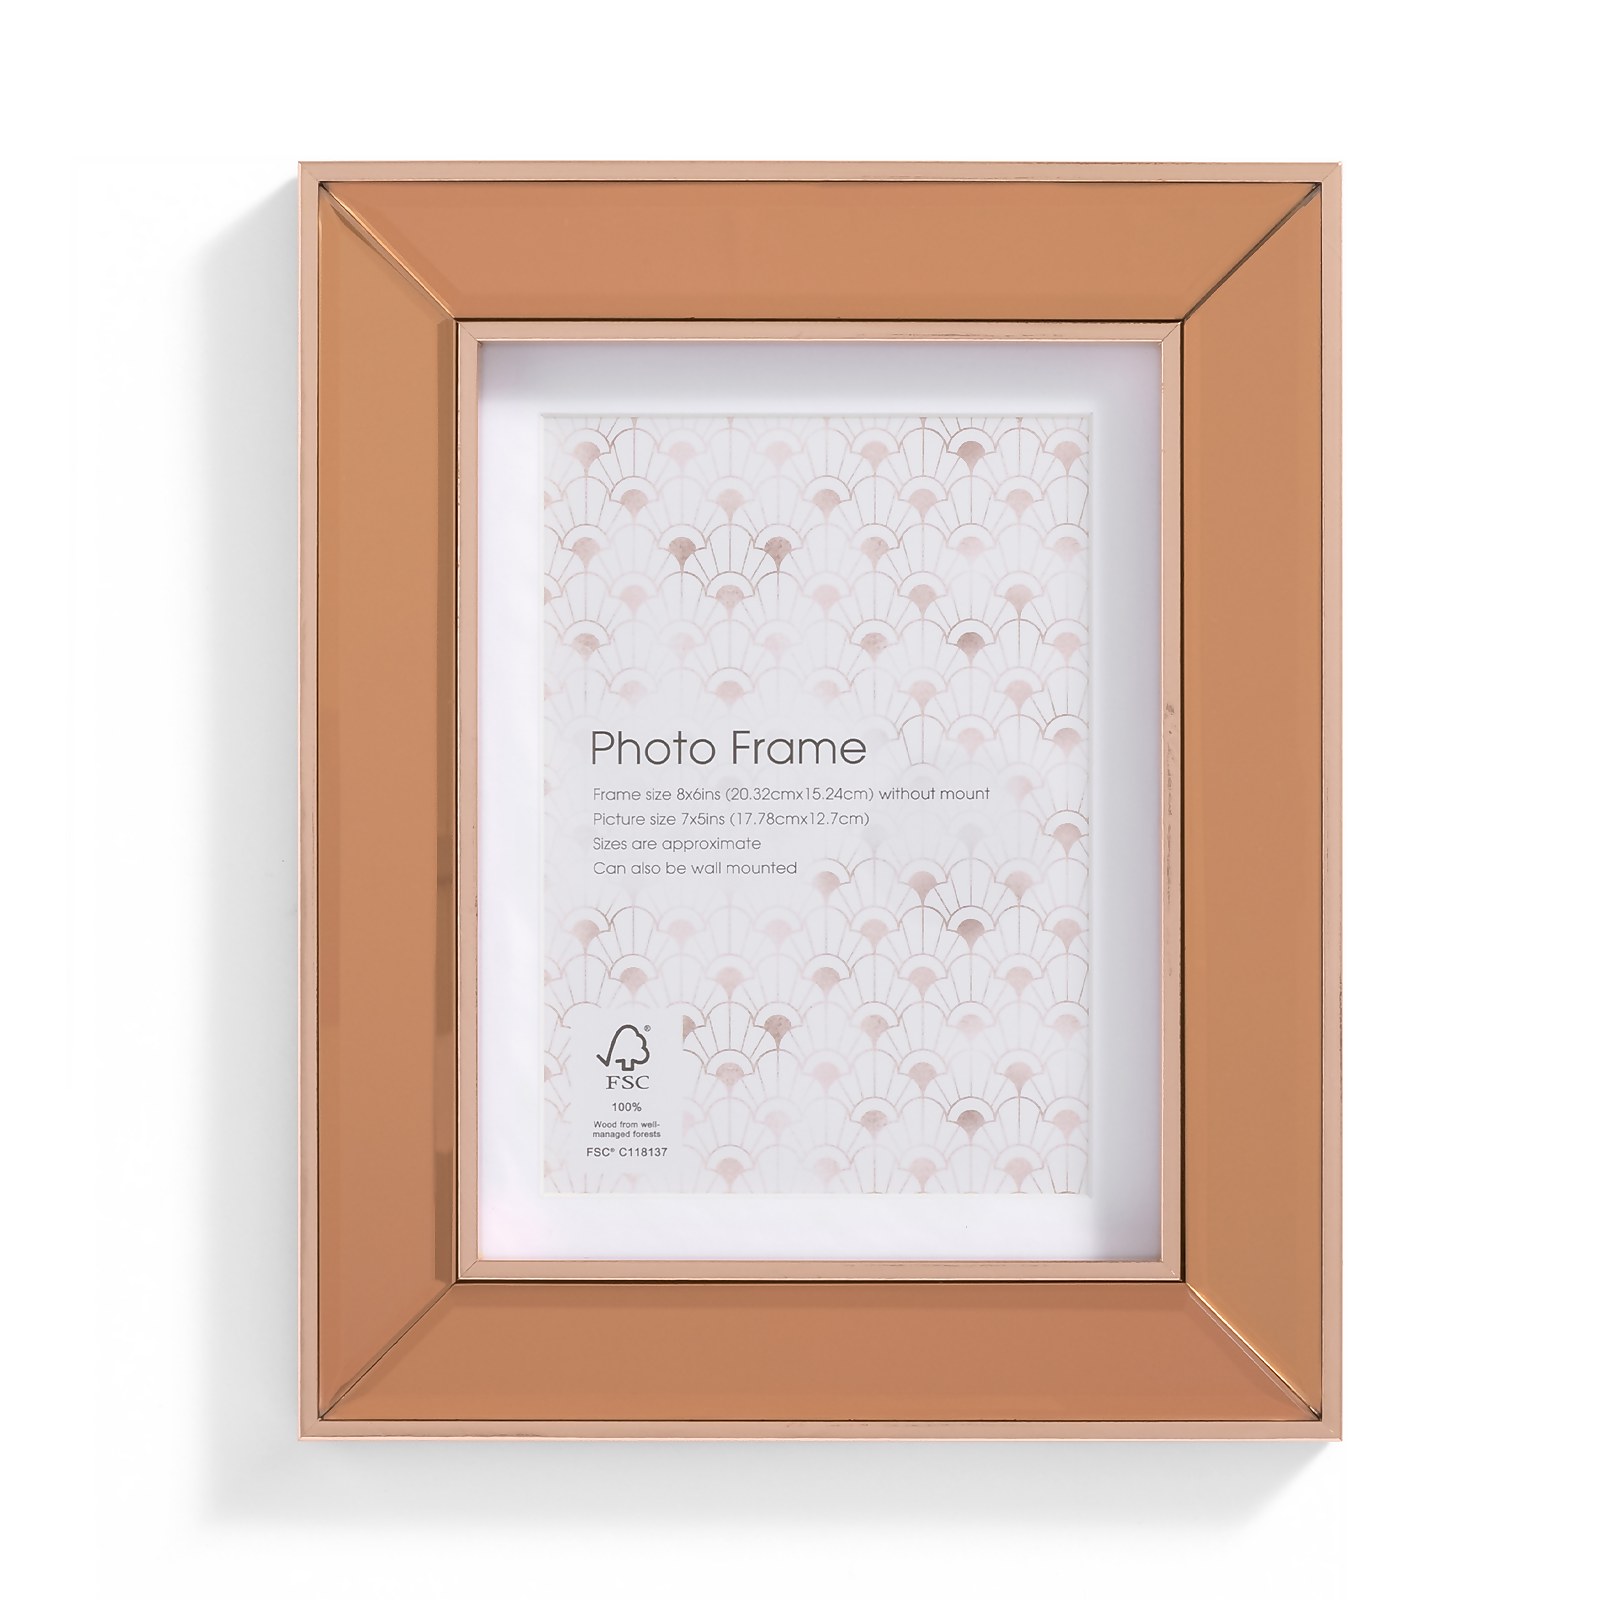 Photo of Bevelled Photo Frame - 7x5in - Rose Gold